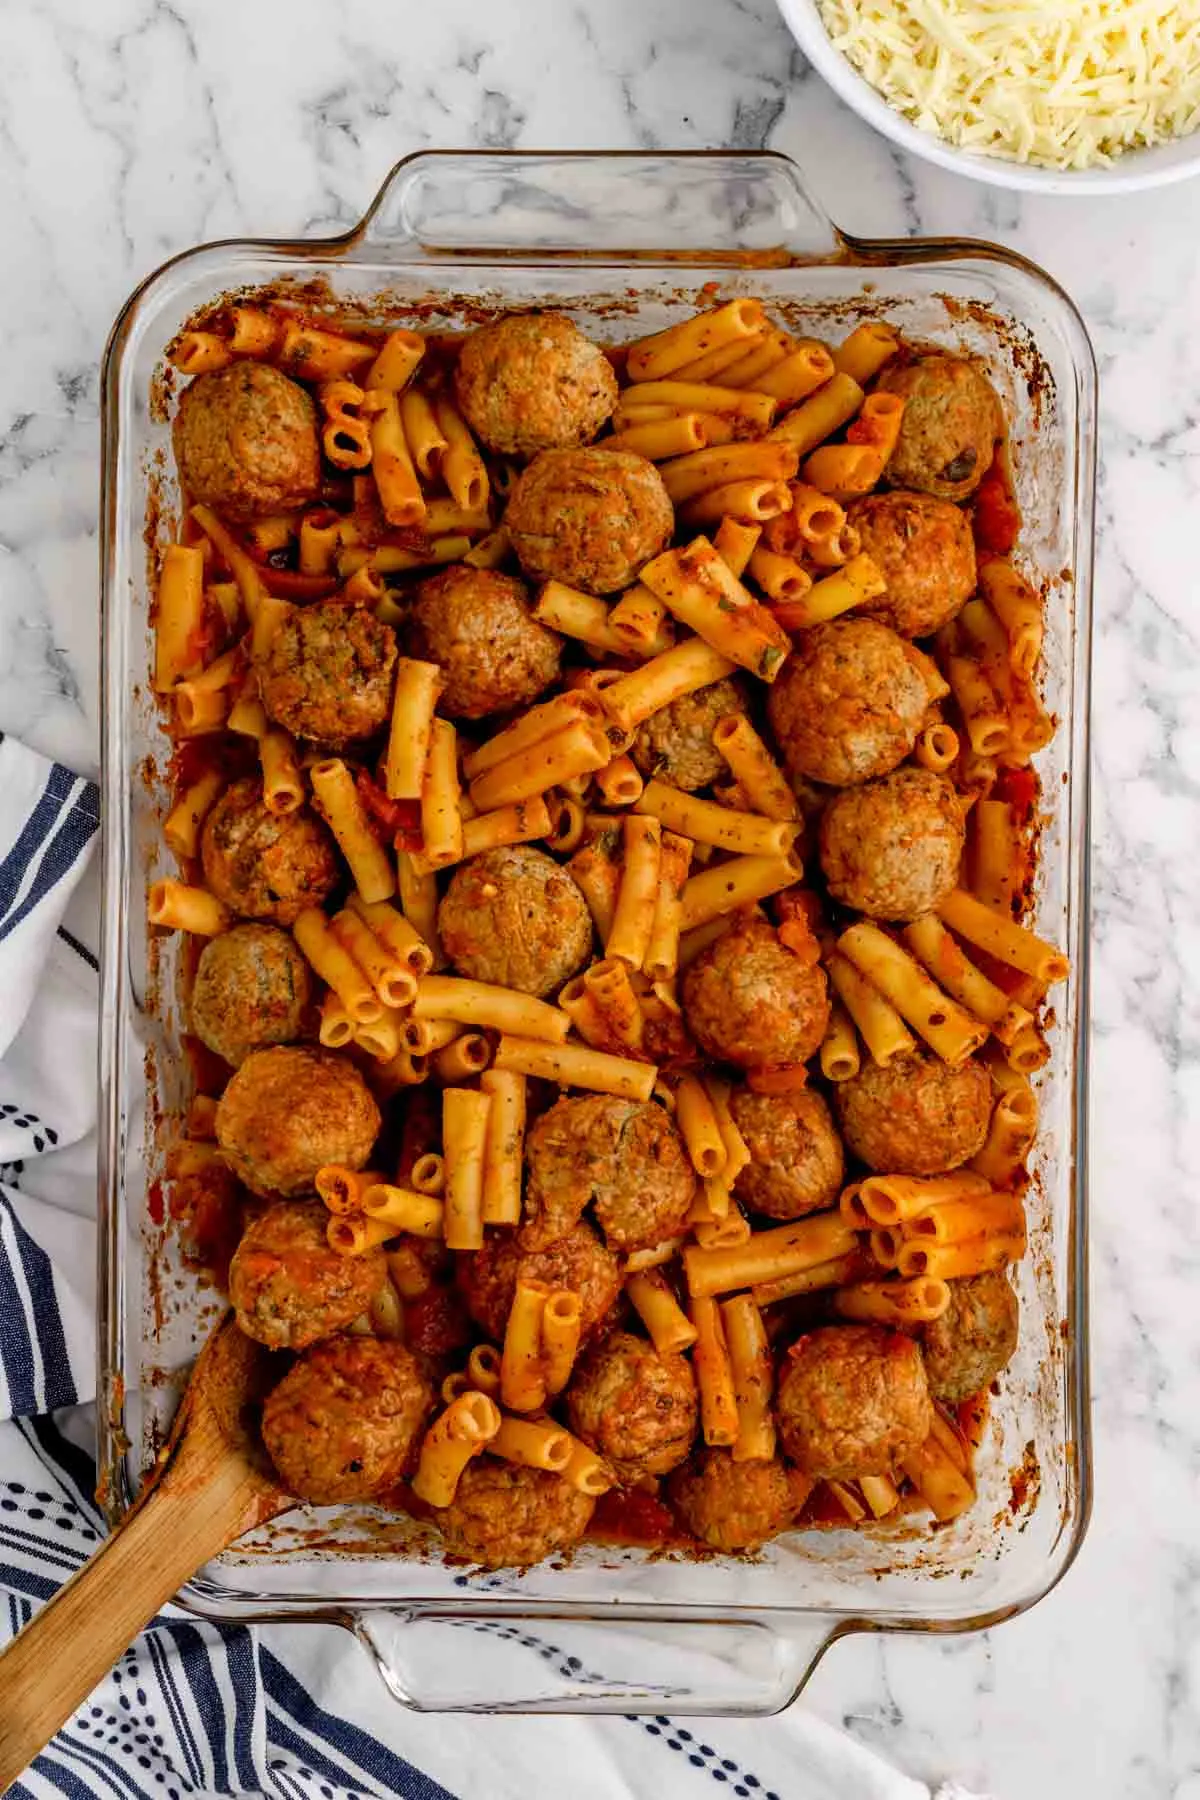 cooked meatballs and ziti noodles in a baking dish